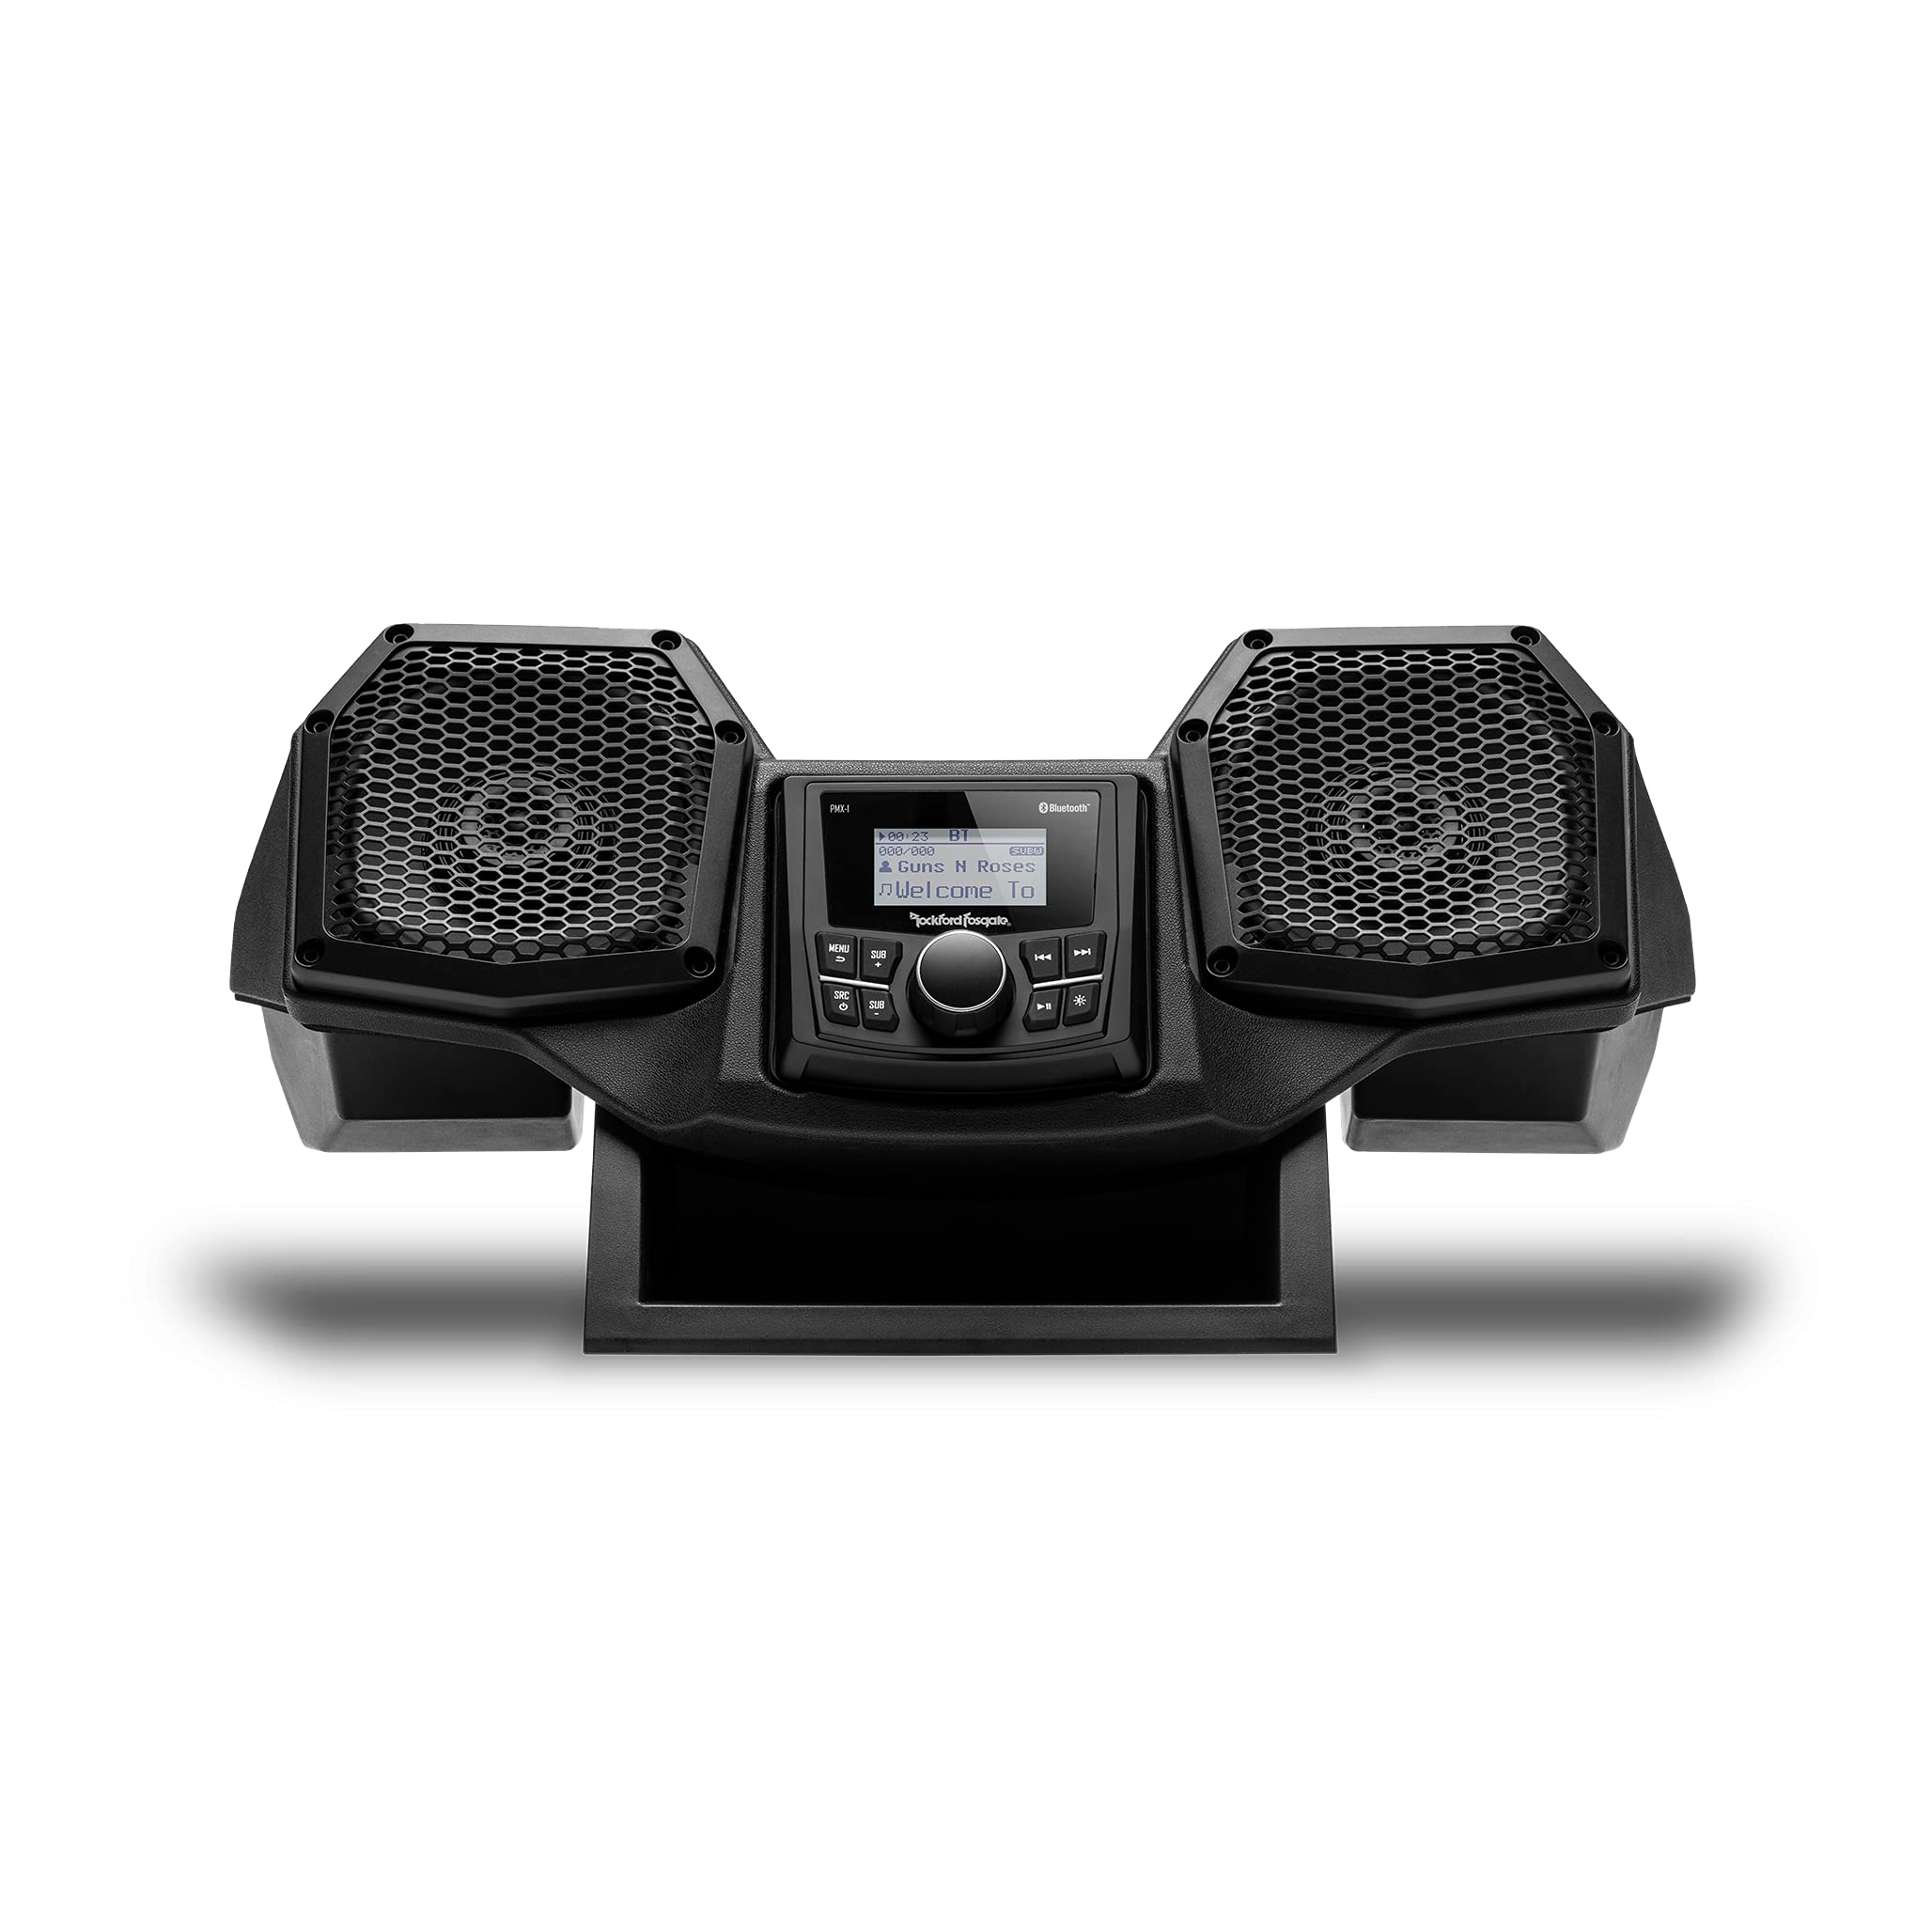 Rockford Fosgate RNGR18-STG1 Audio Kit: All-in-One Dash Housing Pre-Installed with PMX-1 Receiver and 5.25